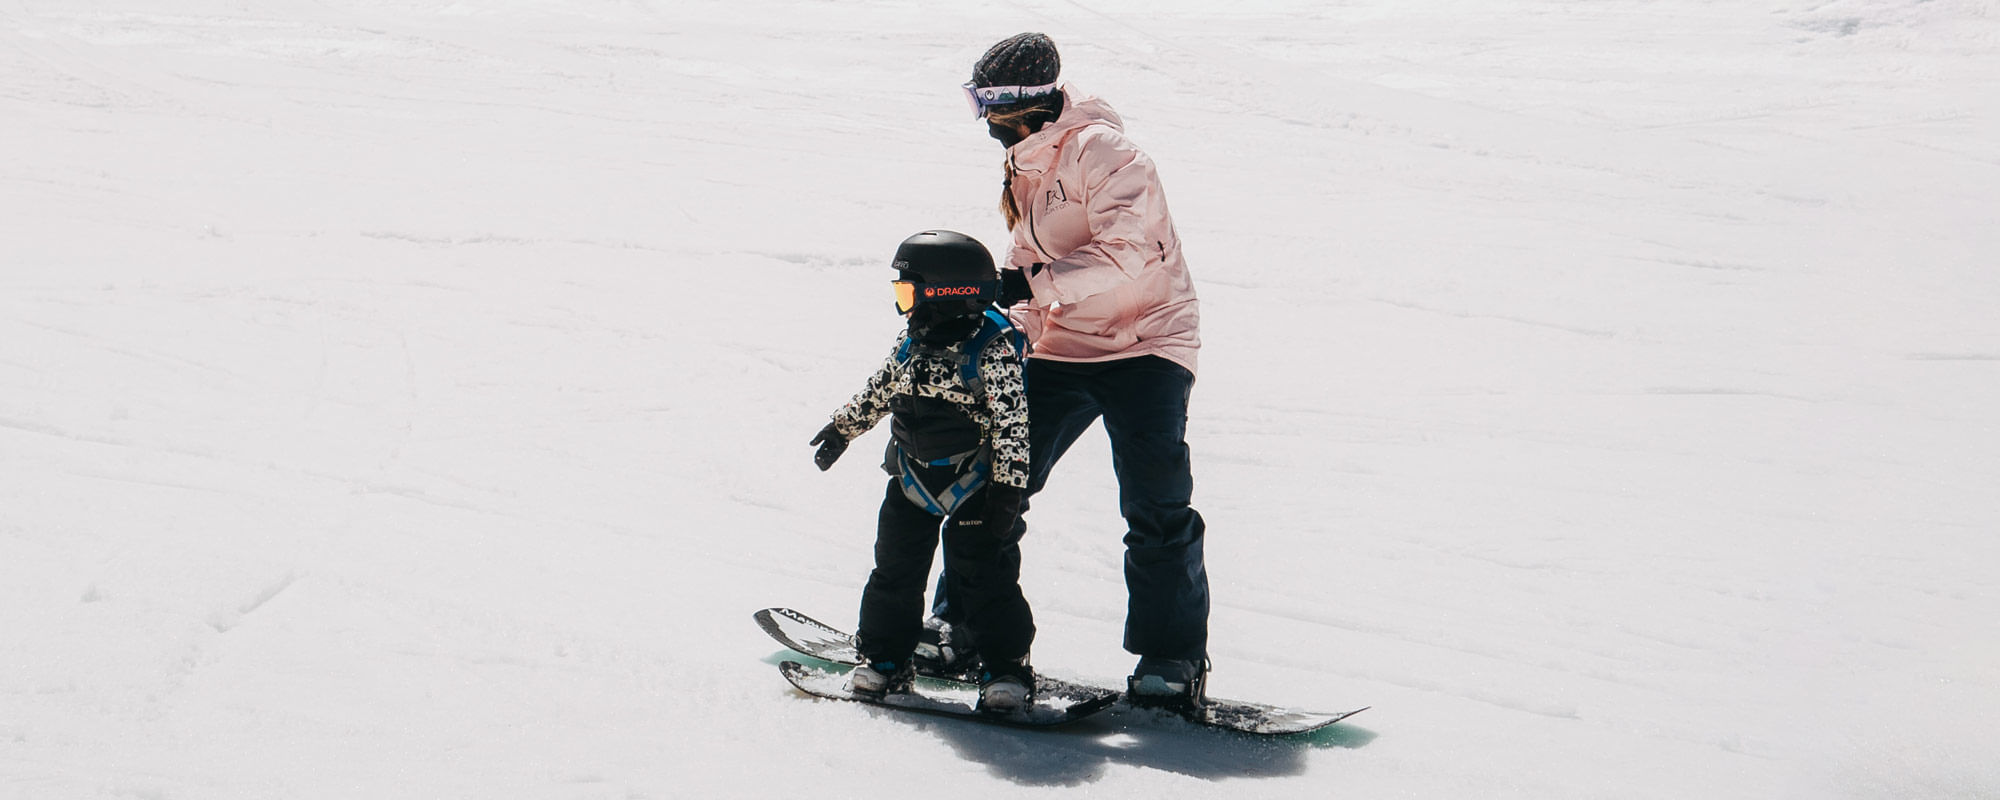 Snowboard Buying Guide